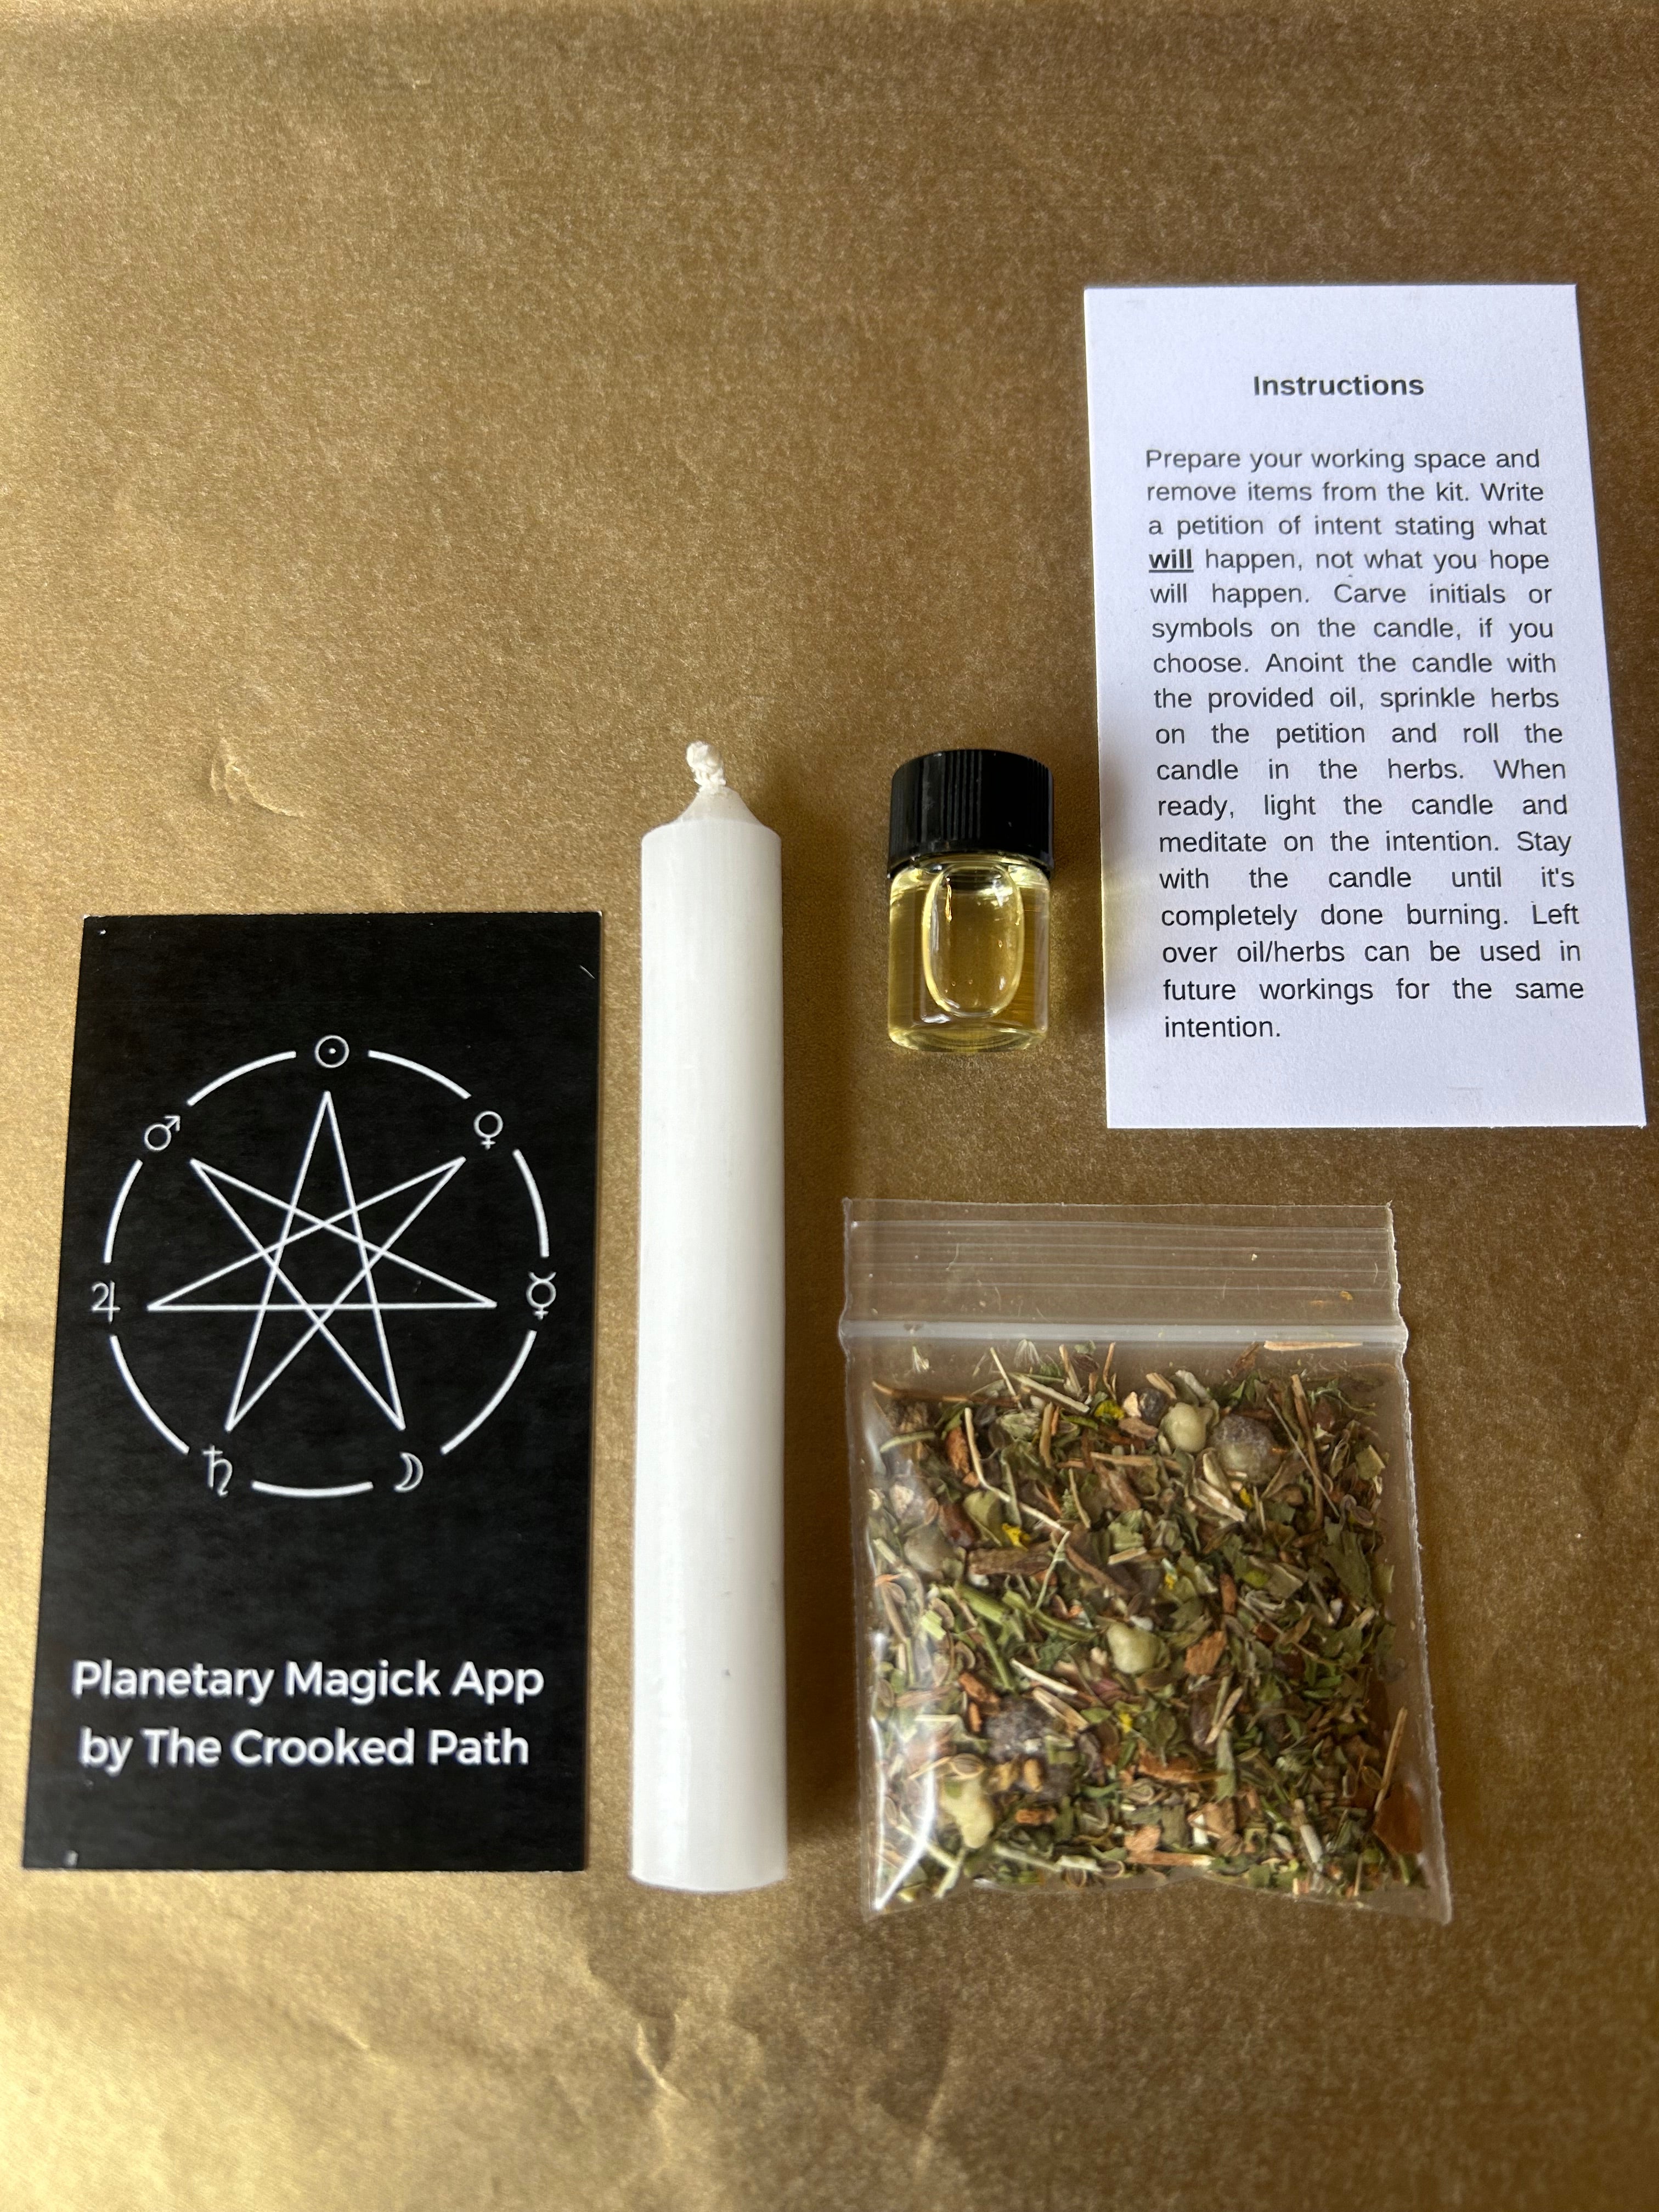 Protection Spell Kit